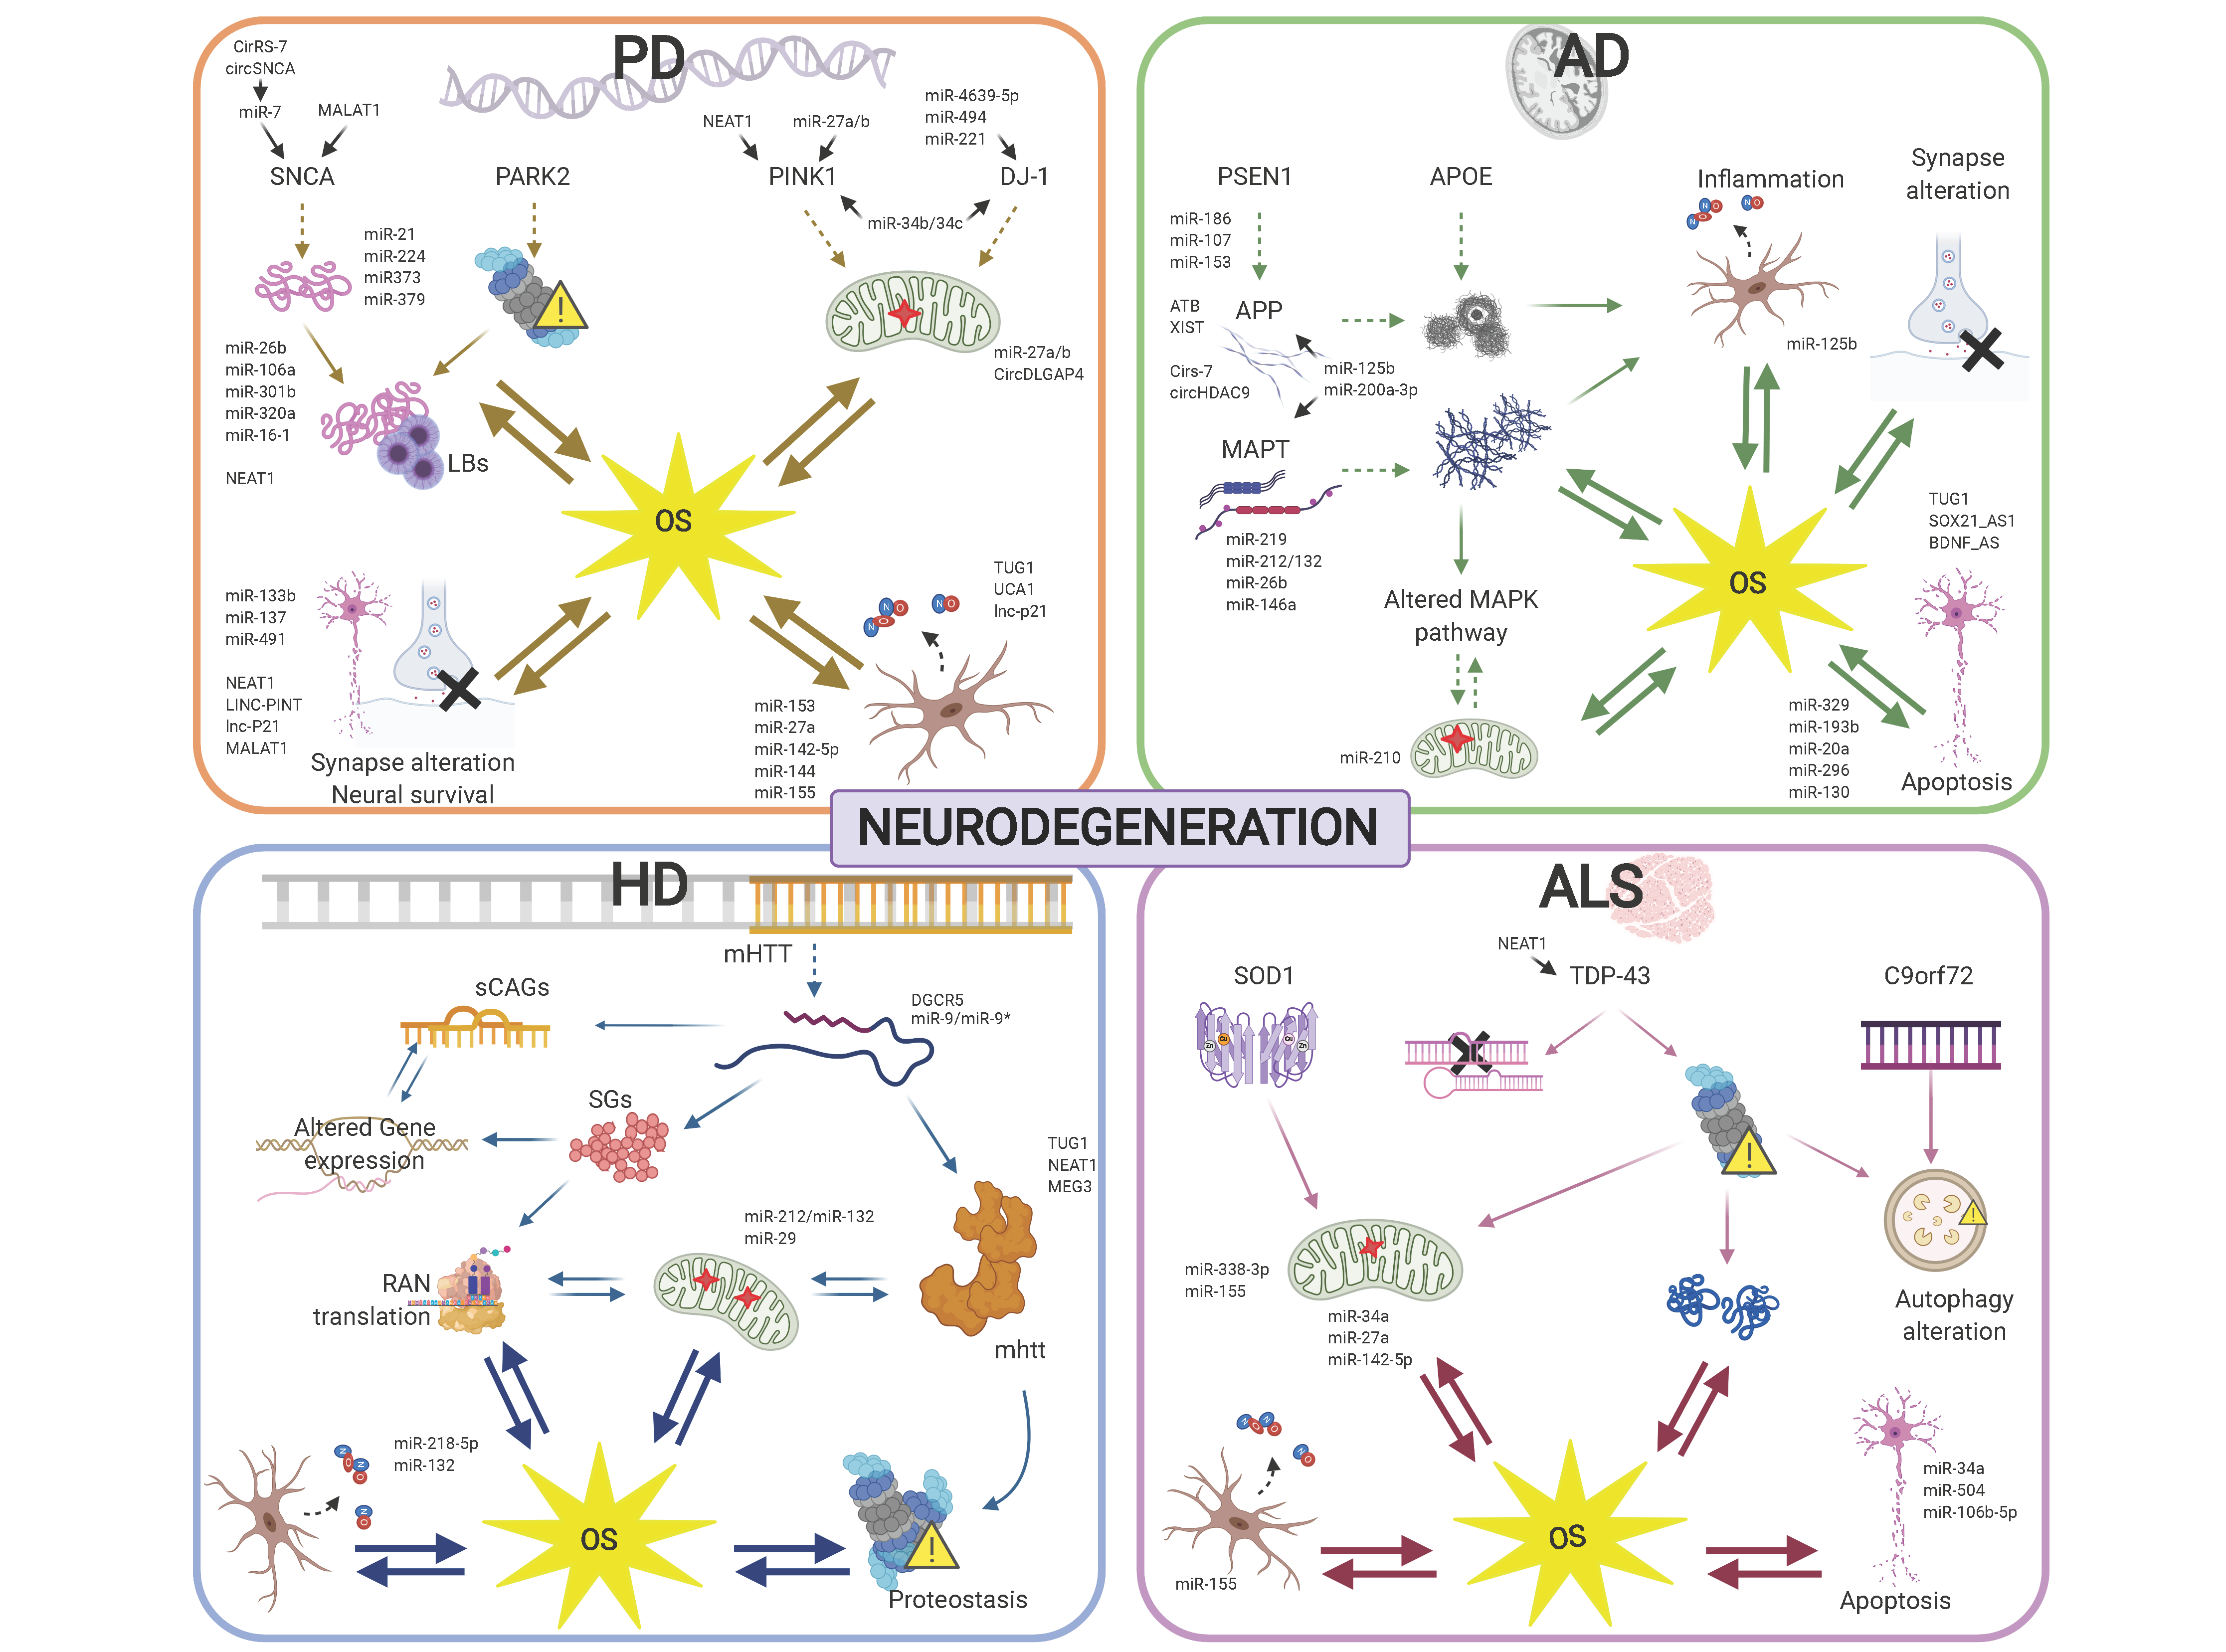 Figure 2. Regulatory ncRNAs are involved in oxidative stress (OS) management in diverse neurodegenerative diseases. Experimentally evidenced ncRNAs related to proteosomal and mitochondrial dysfunction, protein metabolism, reactive oxygen species (ROS) and OS generation and neural viability for Alzheimer’s disease (AD), Parkinson’s disease (PD), Huntington’s disease (HD) and amyotrophic lateral sclerosis (ALS) are shown.